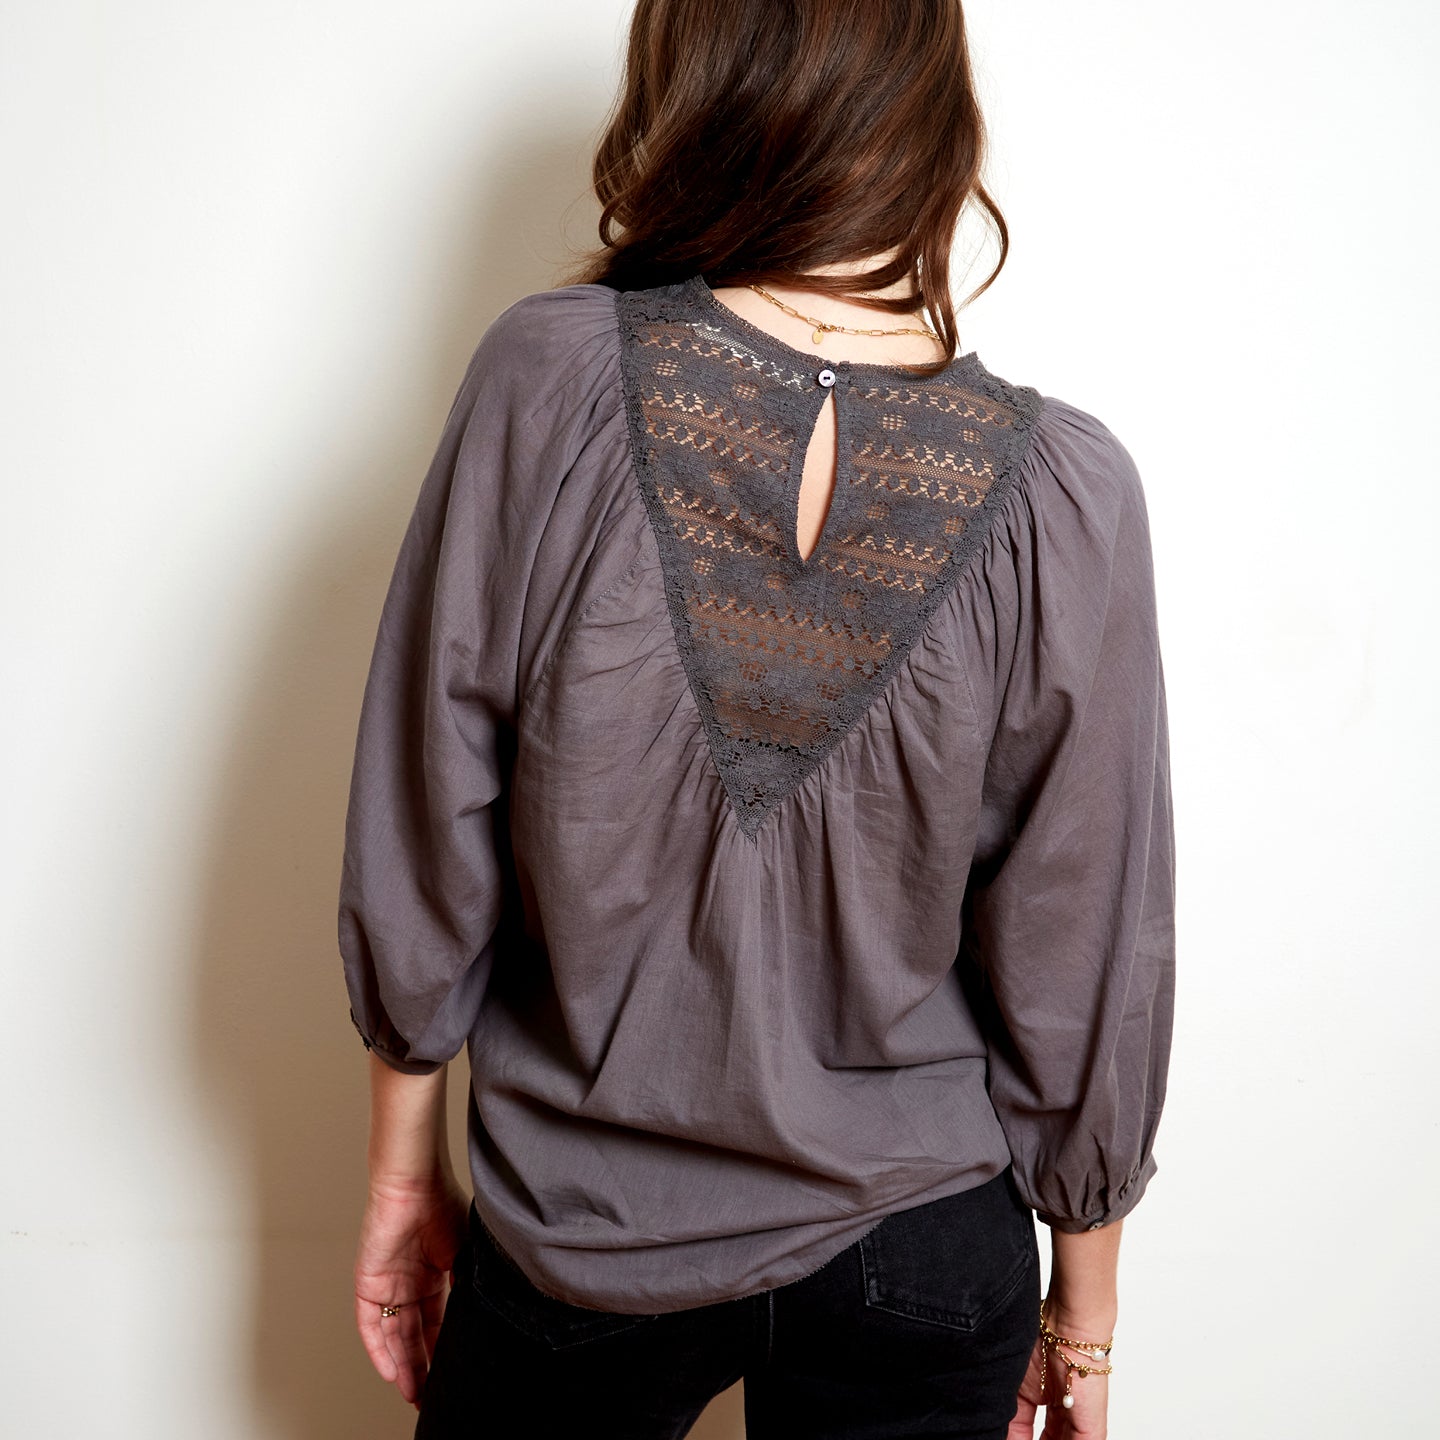 L’ANGE BLOUSE WITH SLEEVES - CHARCOAL